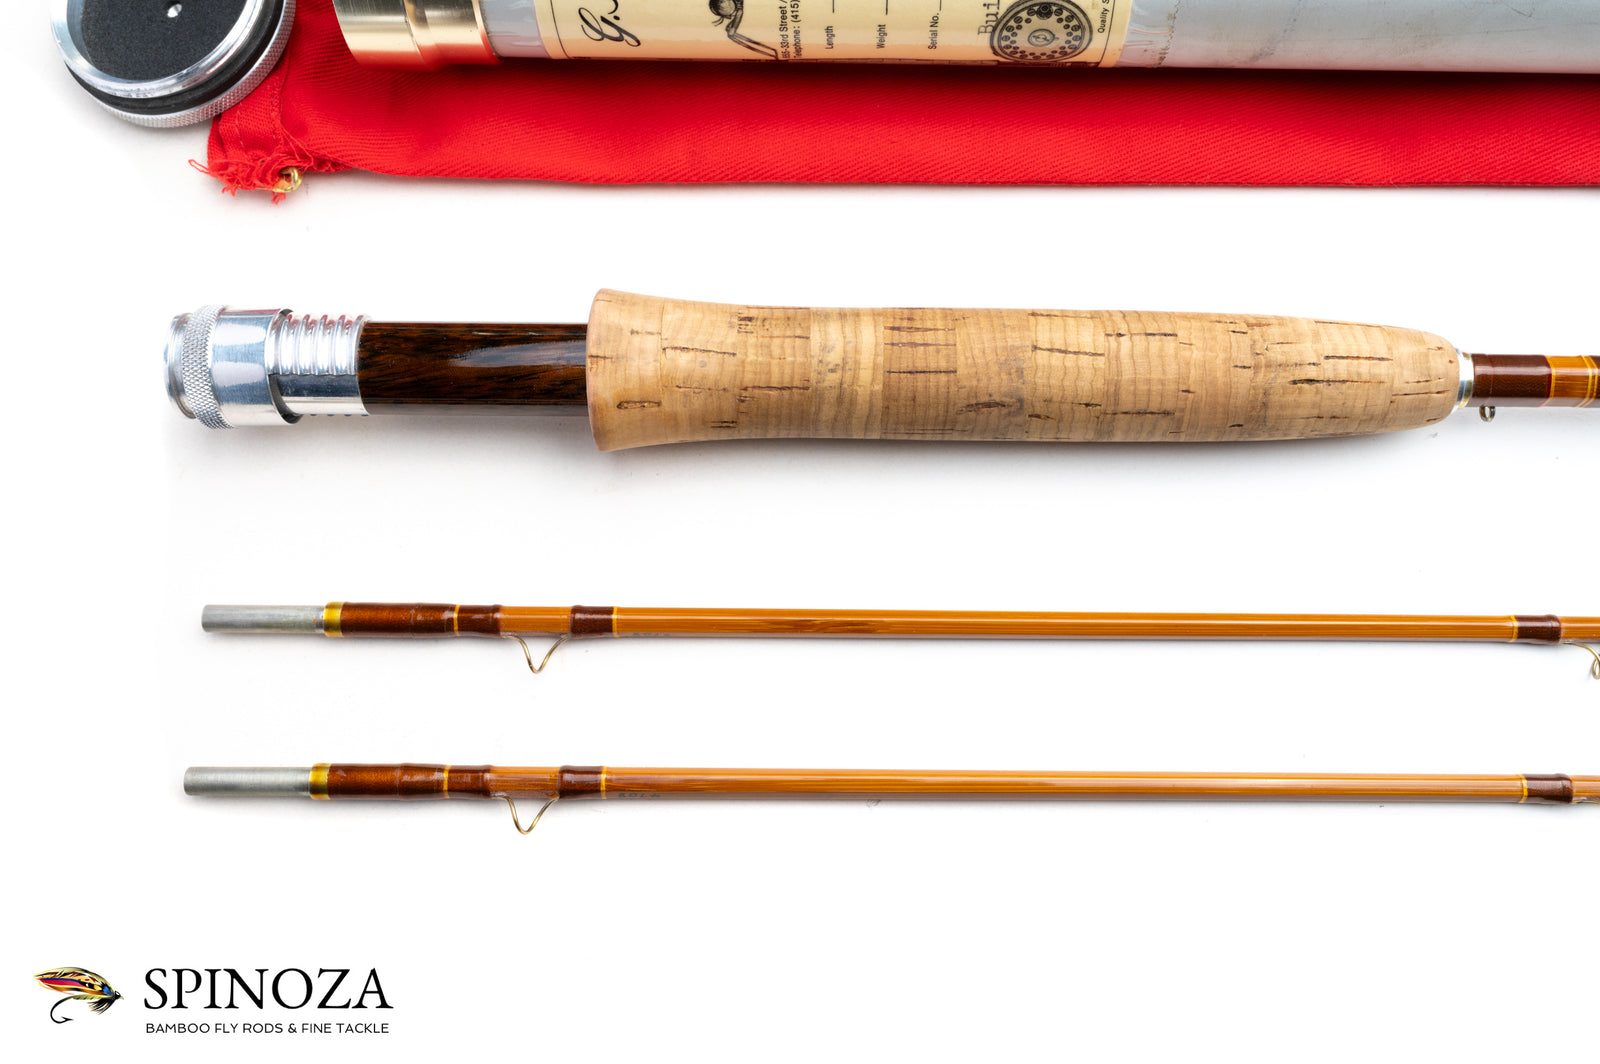 Sold at Auction: 2 FLY RODS, CLARK REEL, FLY FISHING ACCESSORIES